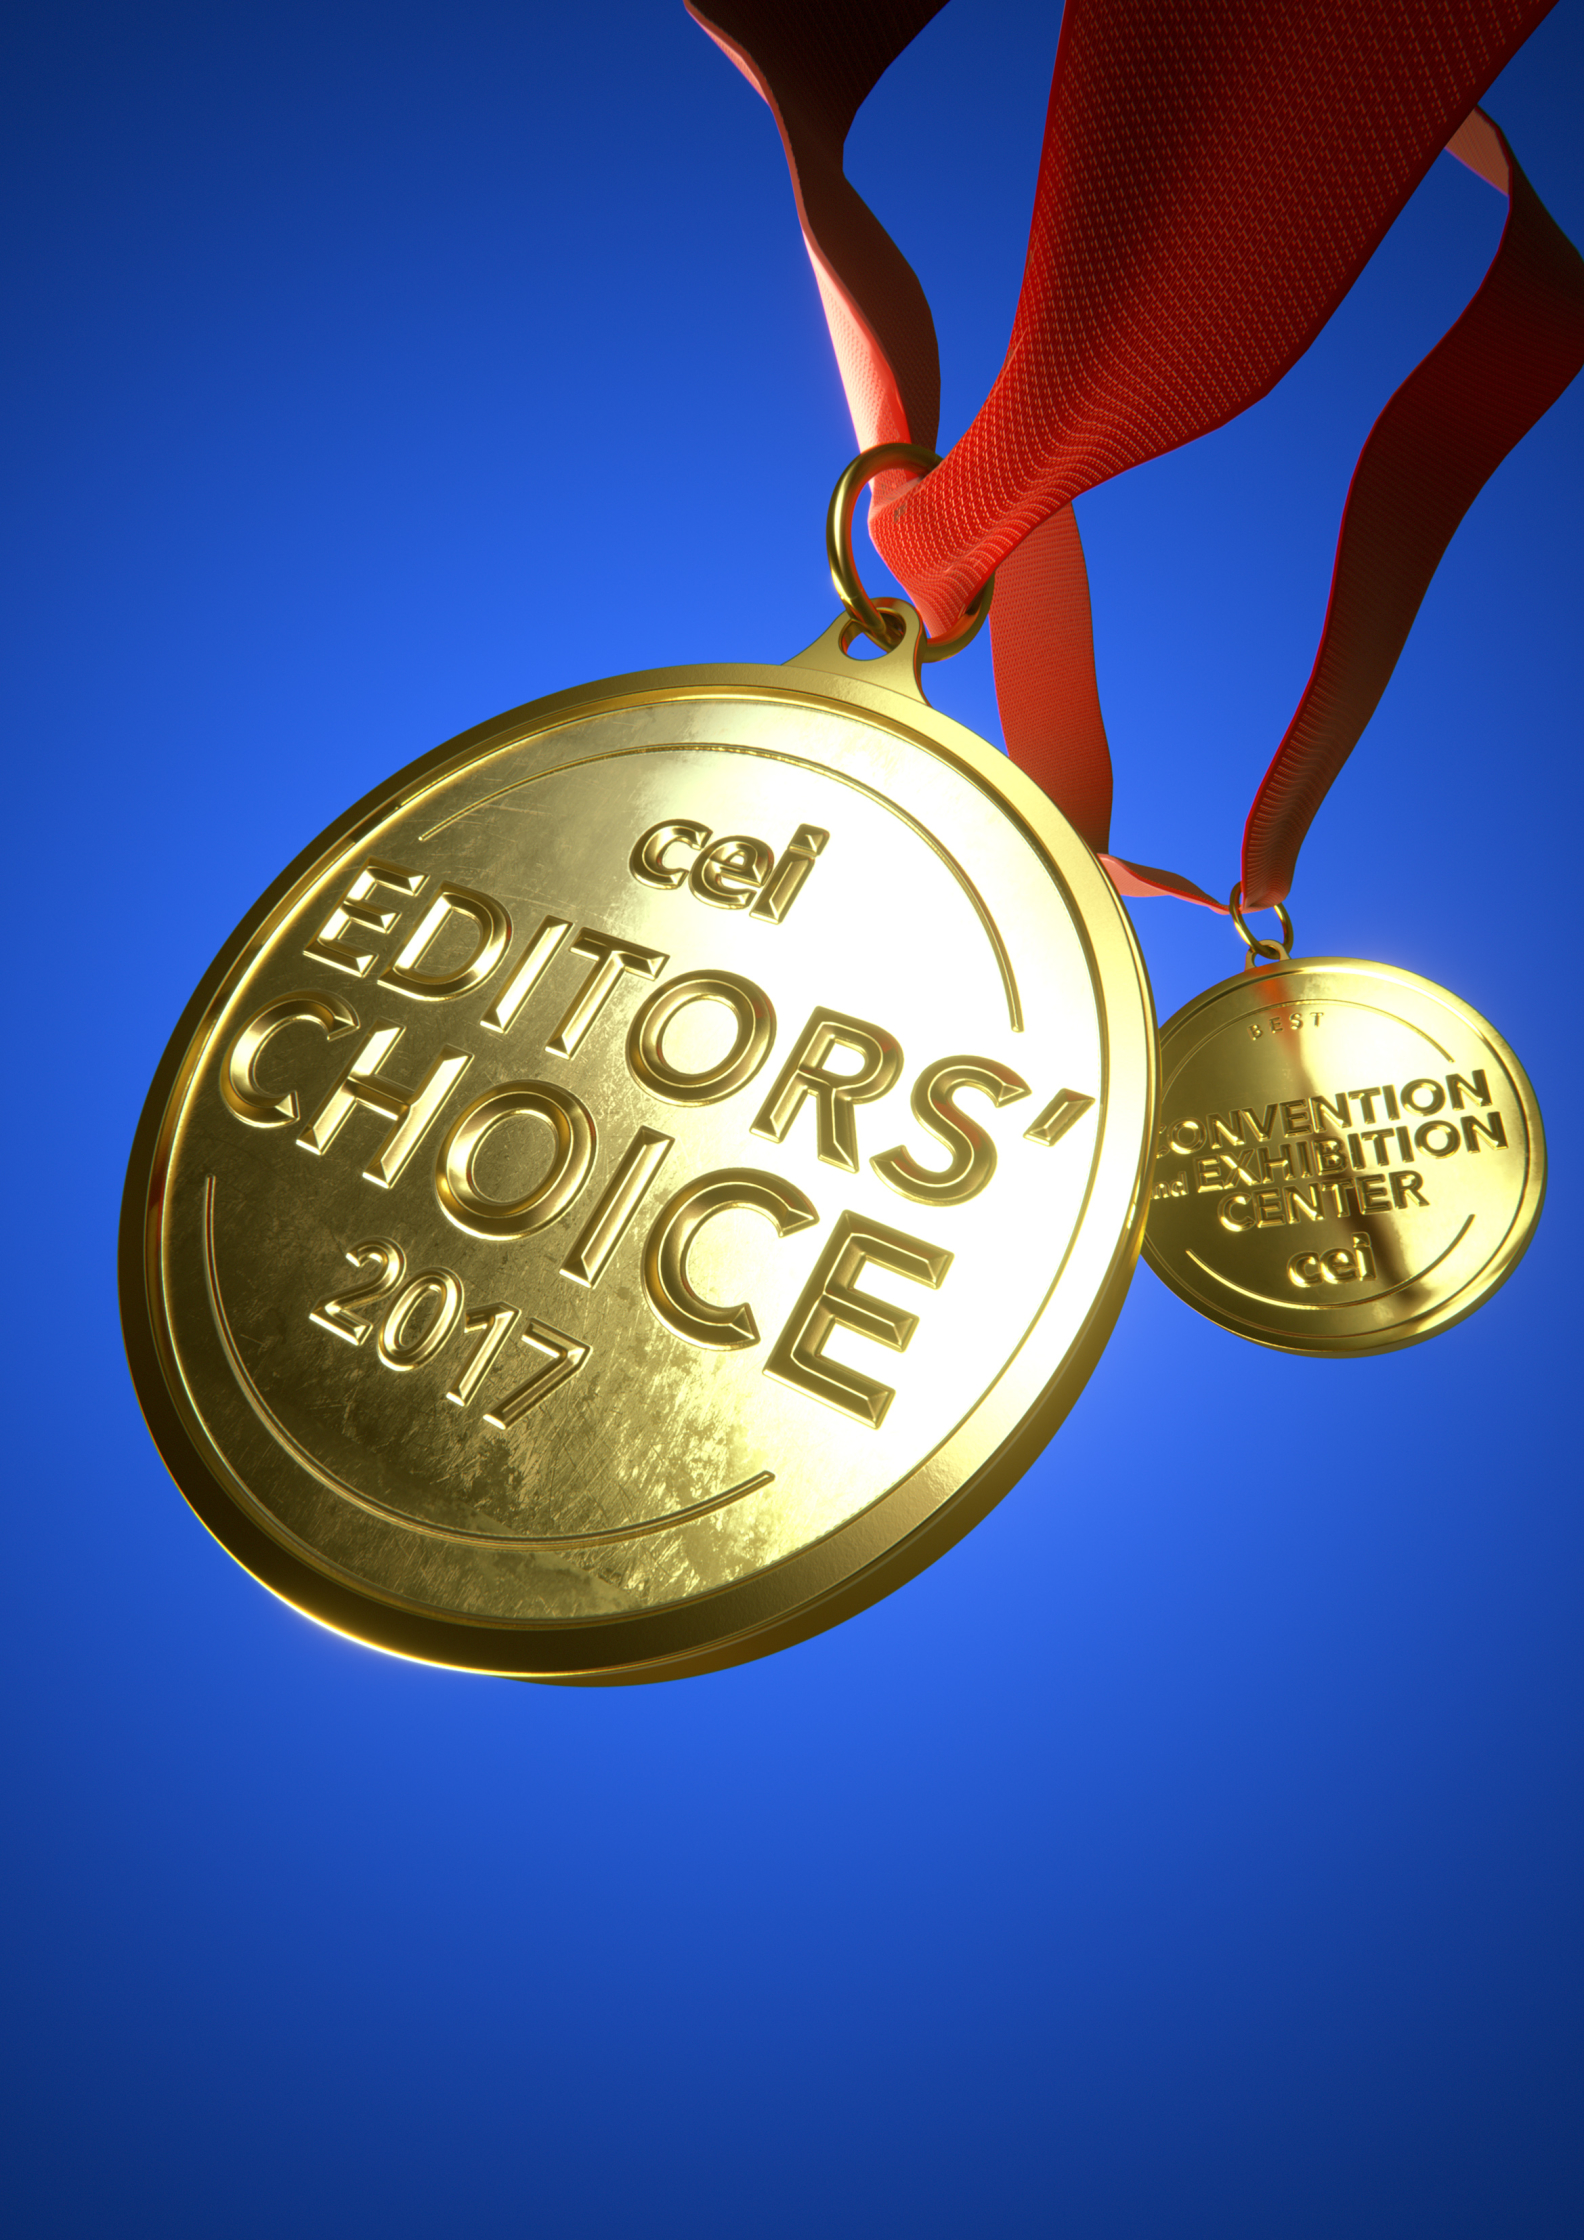 cgi-gold-medals- CEI-magazine cover-crowther.jpg